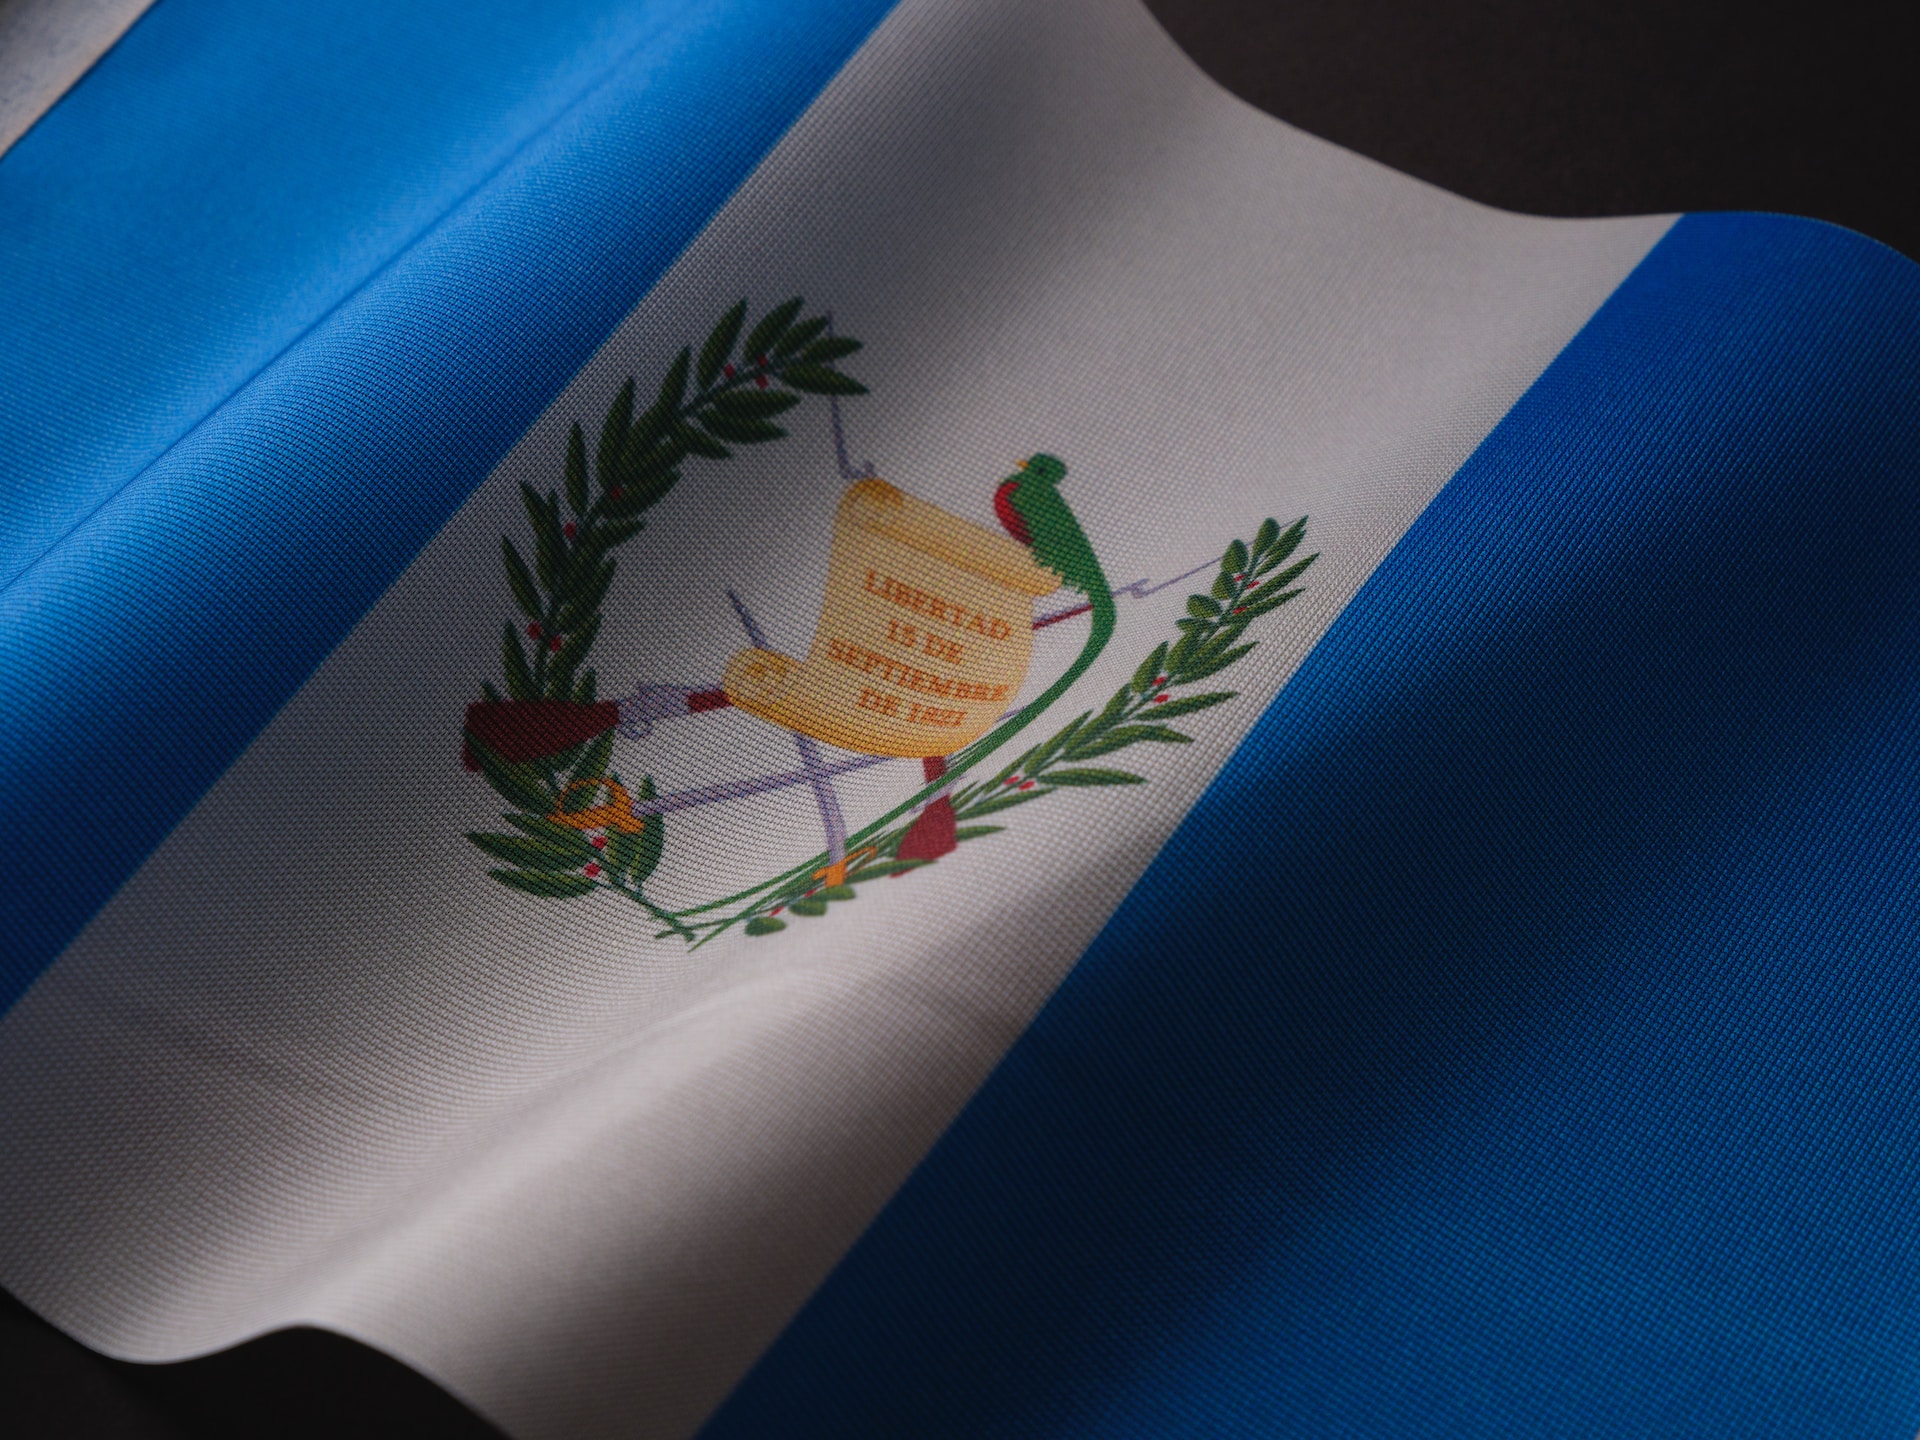 Employment Rules and Regulations in Guatemala